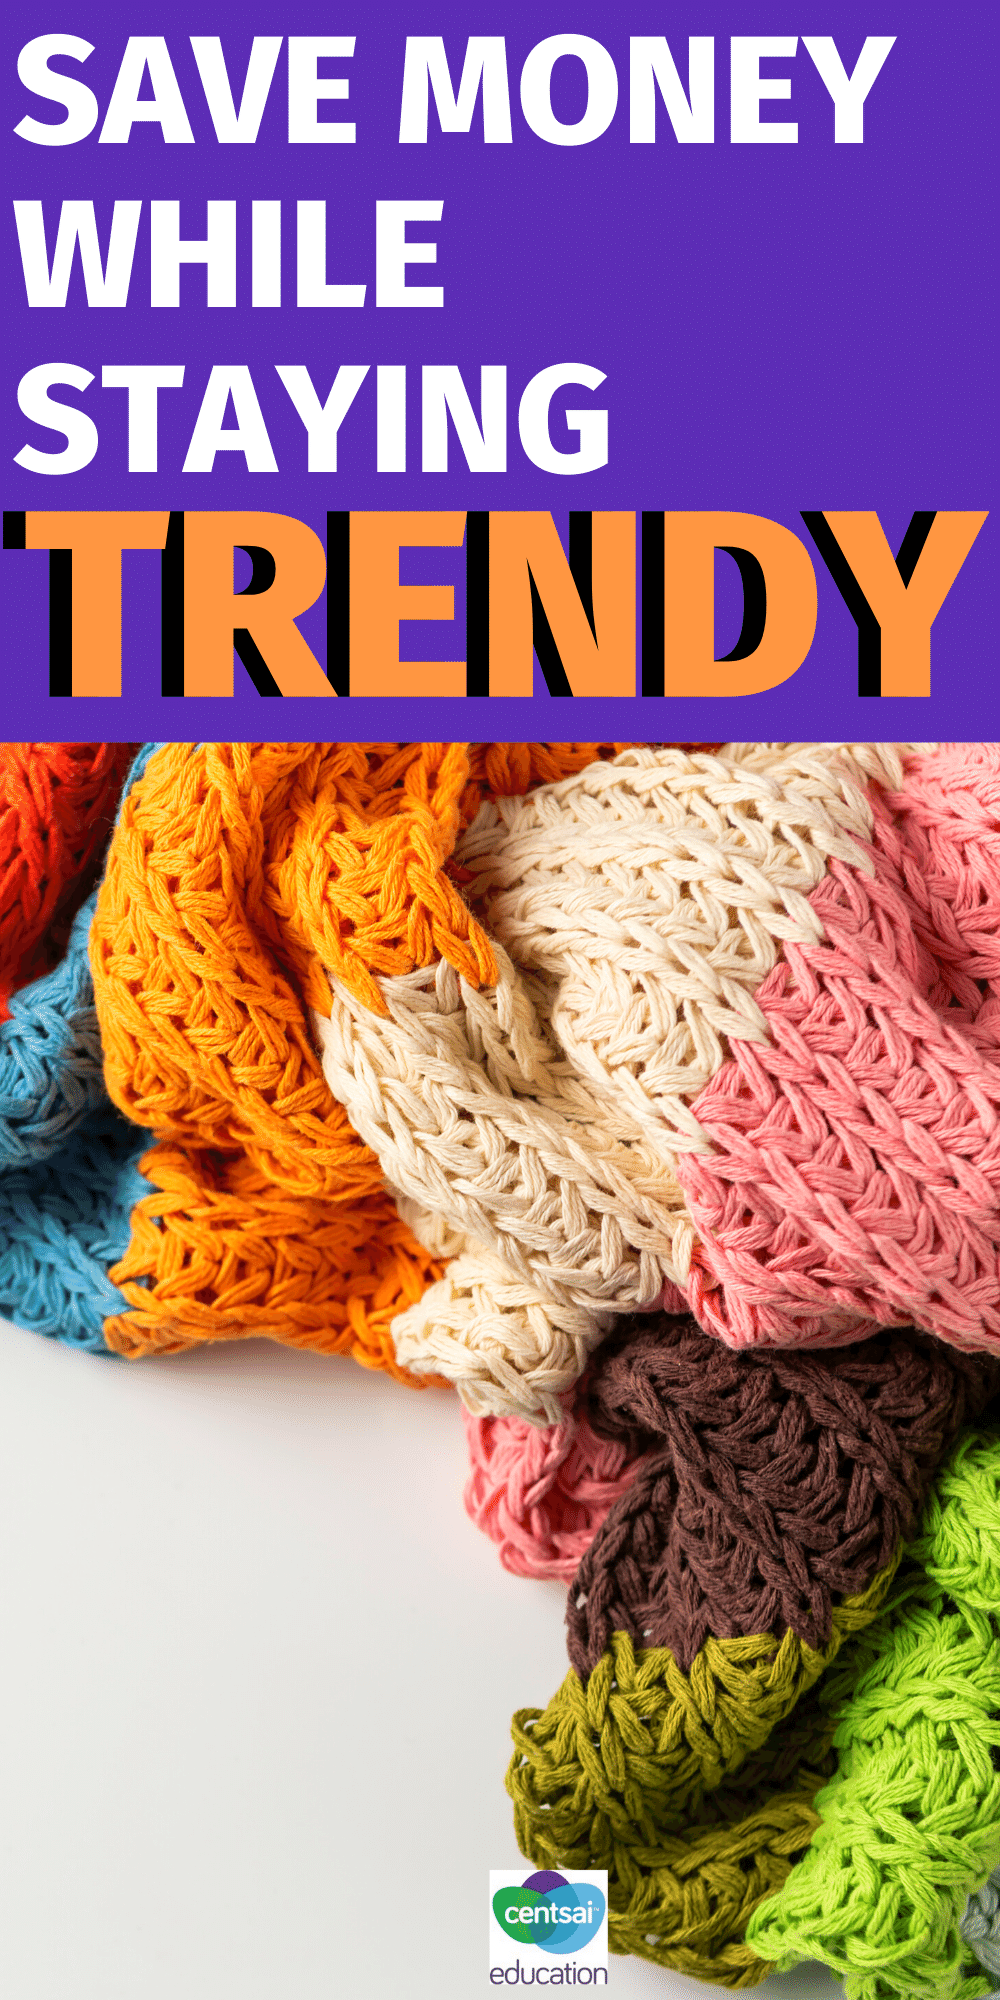 Do your students want the latest trendy scarves and fancy bath bombs? Of course they do! Here are some practical ideas for them to have what they want at a super low price. #studentlife #frugaltips #tips #Personalfinancetips